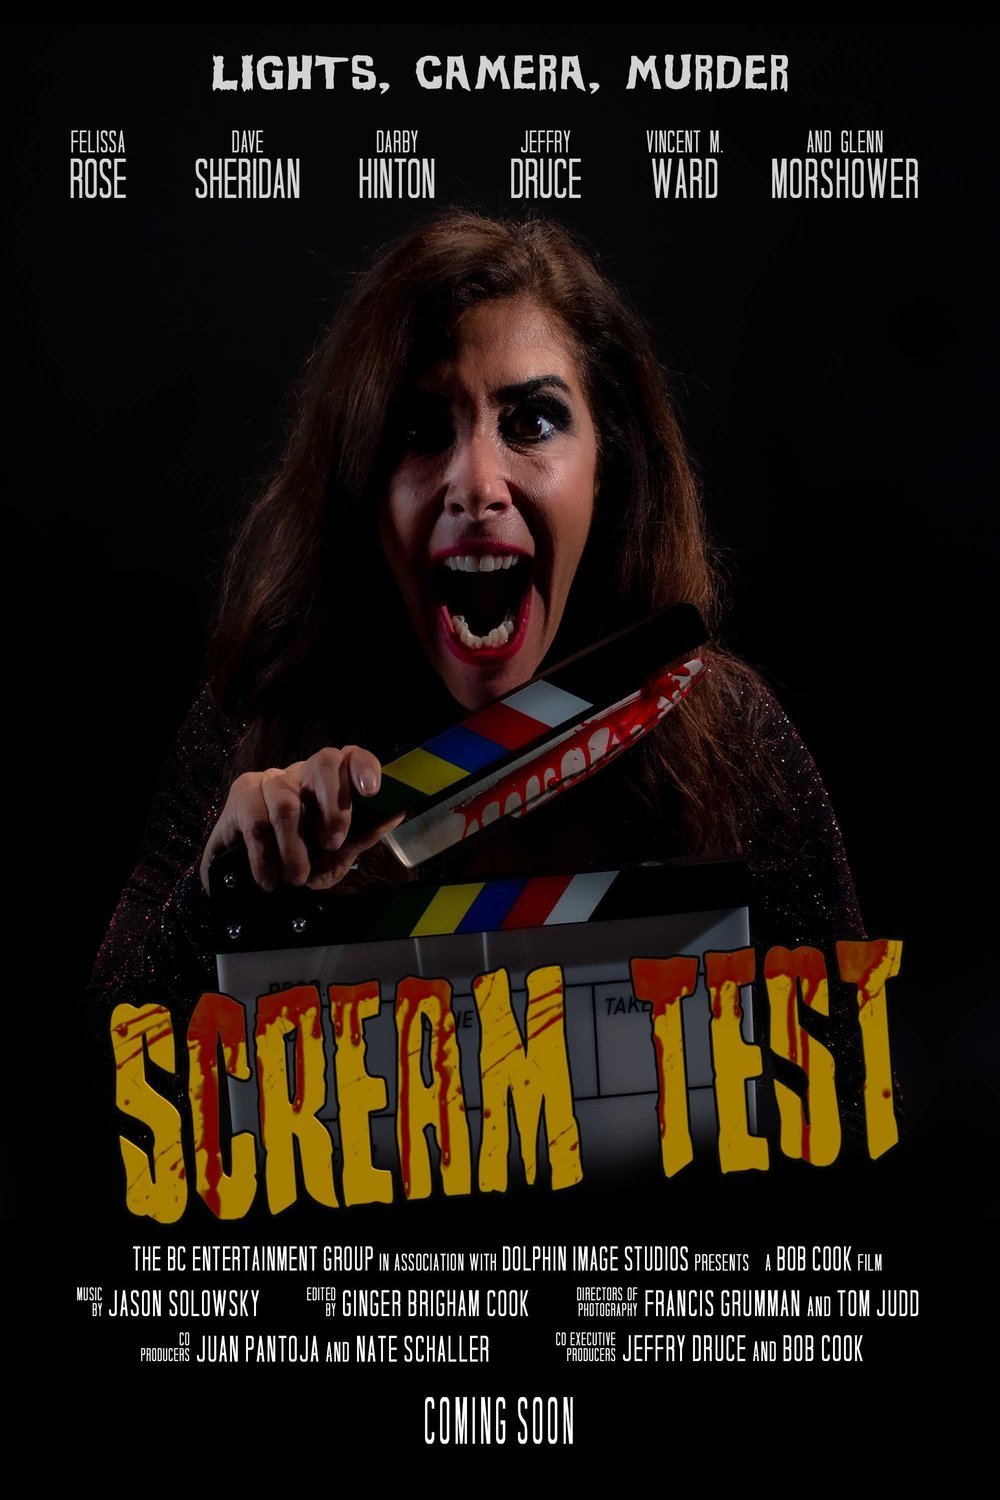 Poster of the movie Scream Test